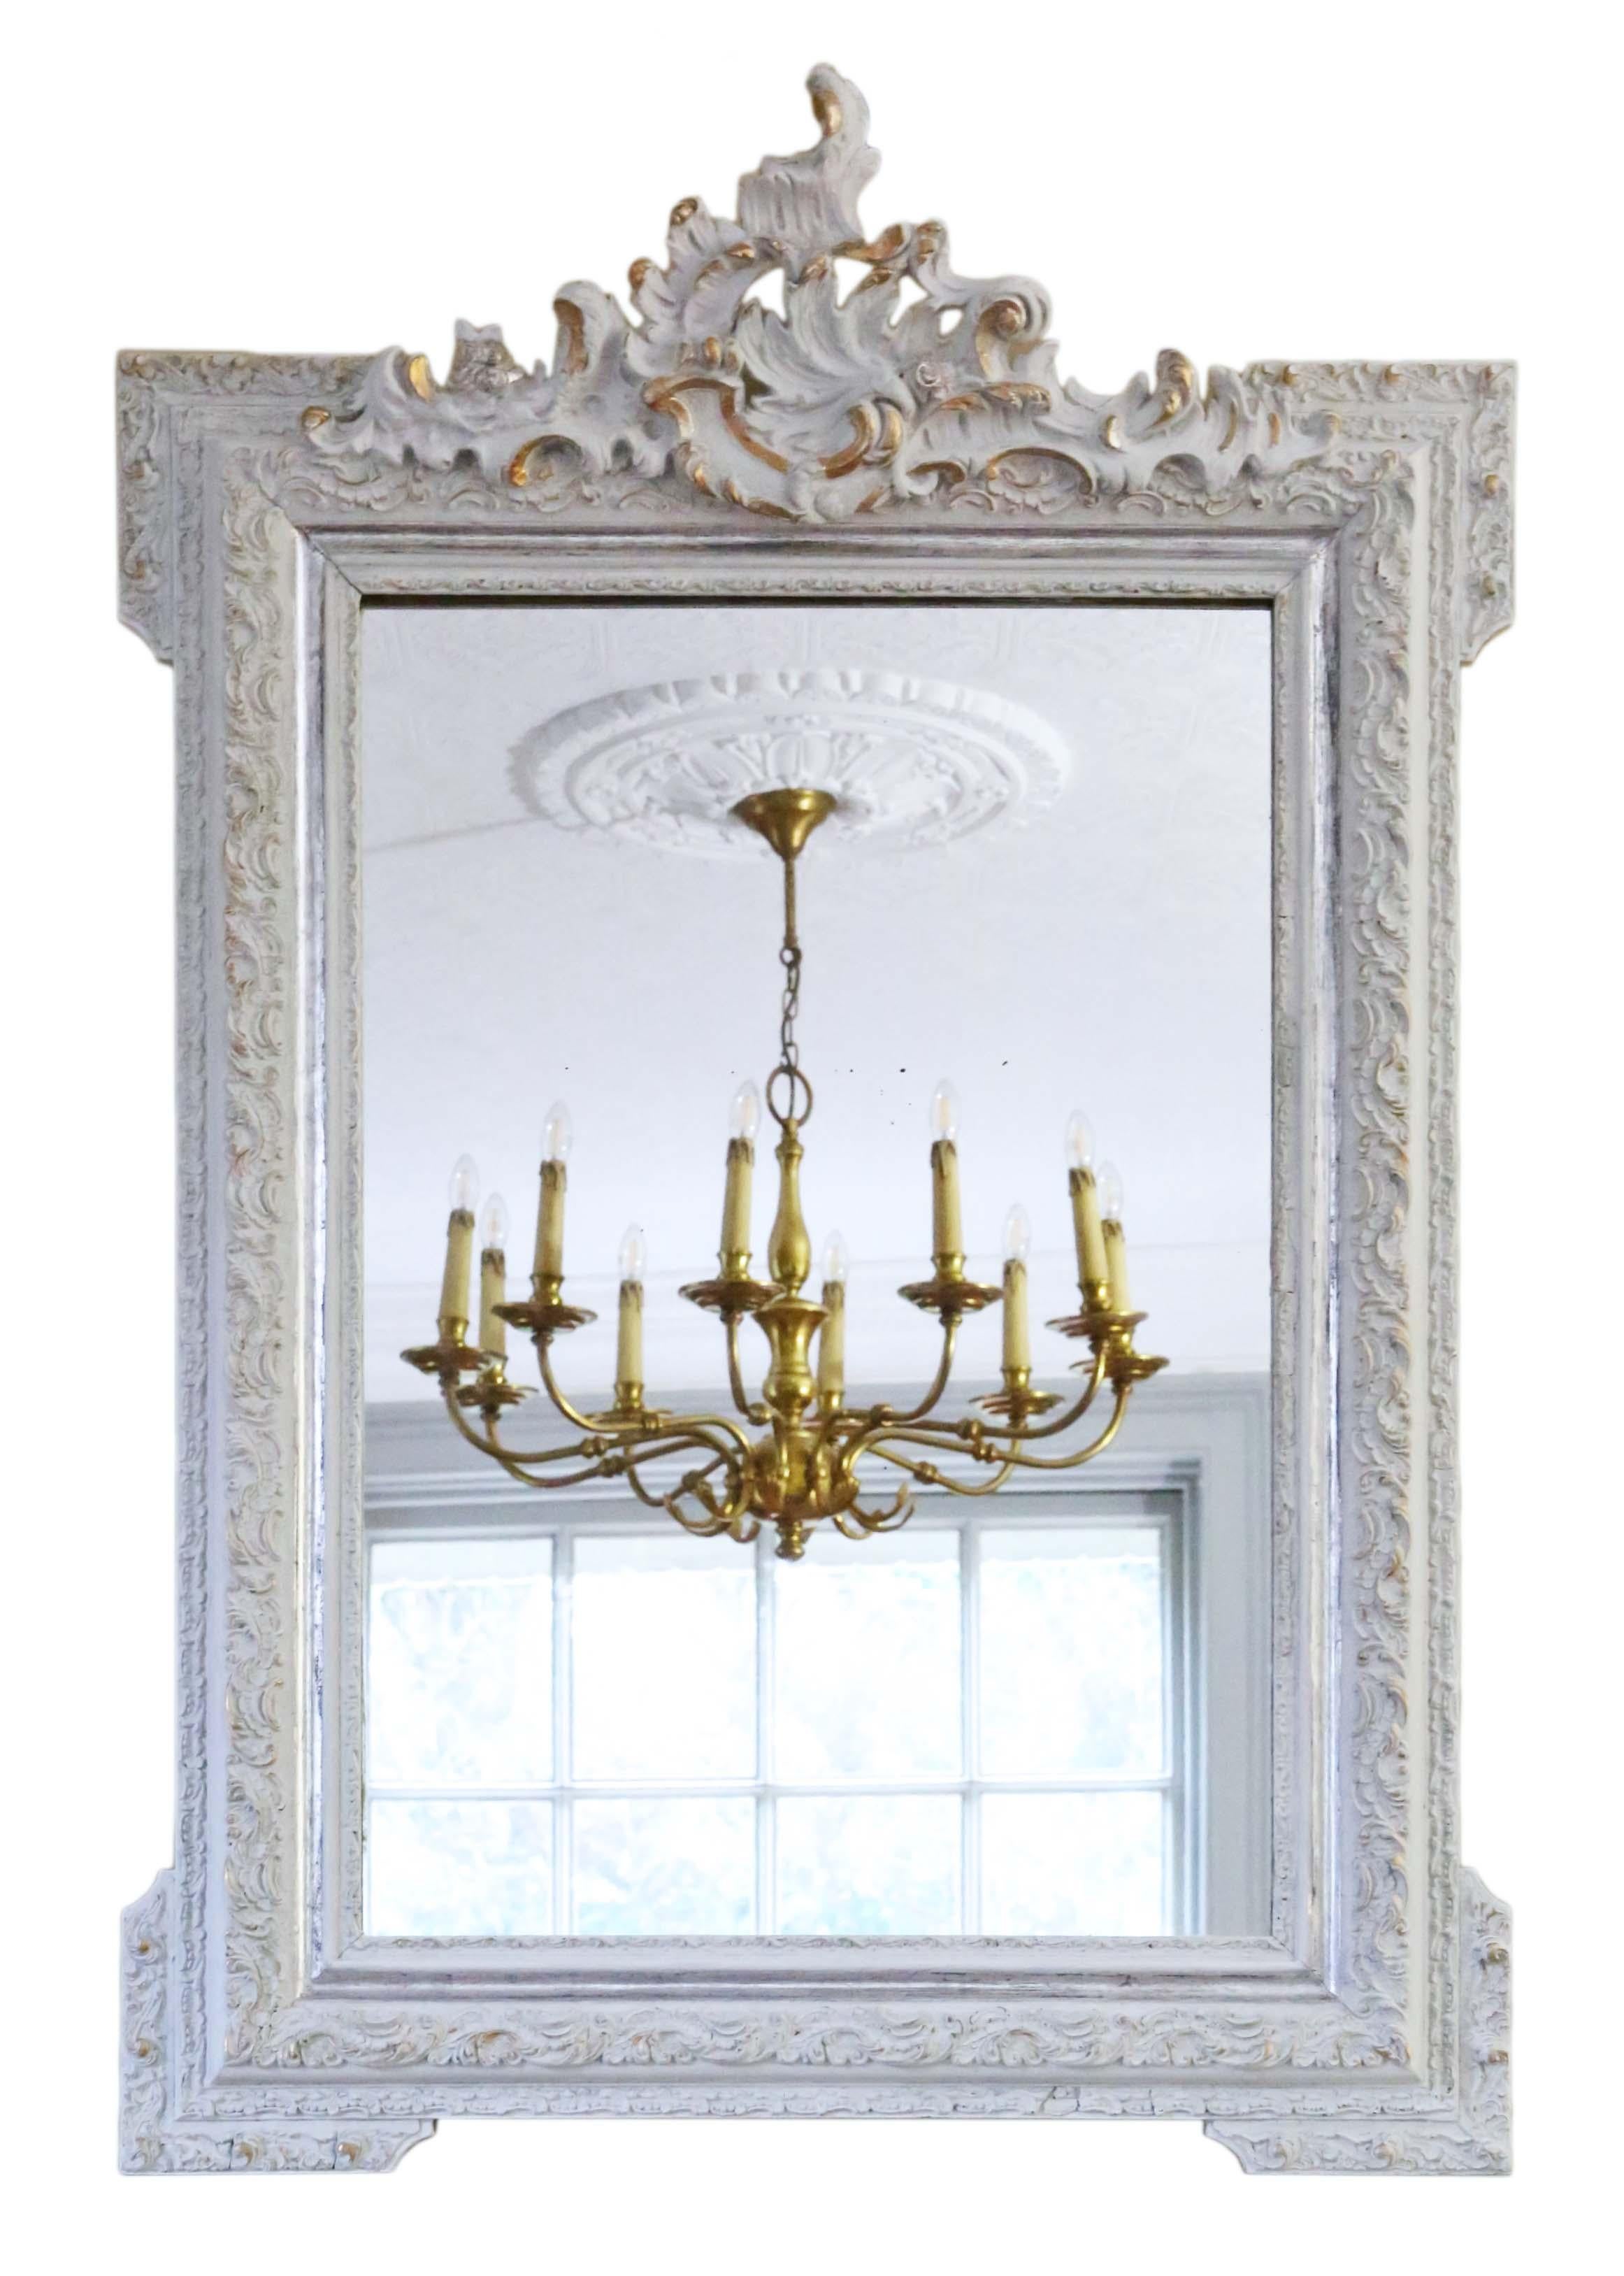 Antique large quality light grey and gilt overmantle or wall mirror C1900. Lovely charm and elegance. The mirror has its original glass and back, with a later finish on the frame. Minor losses and touching up here and there to the frame.

An